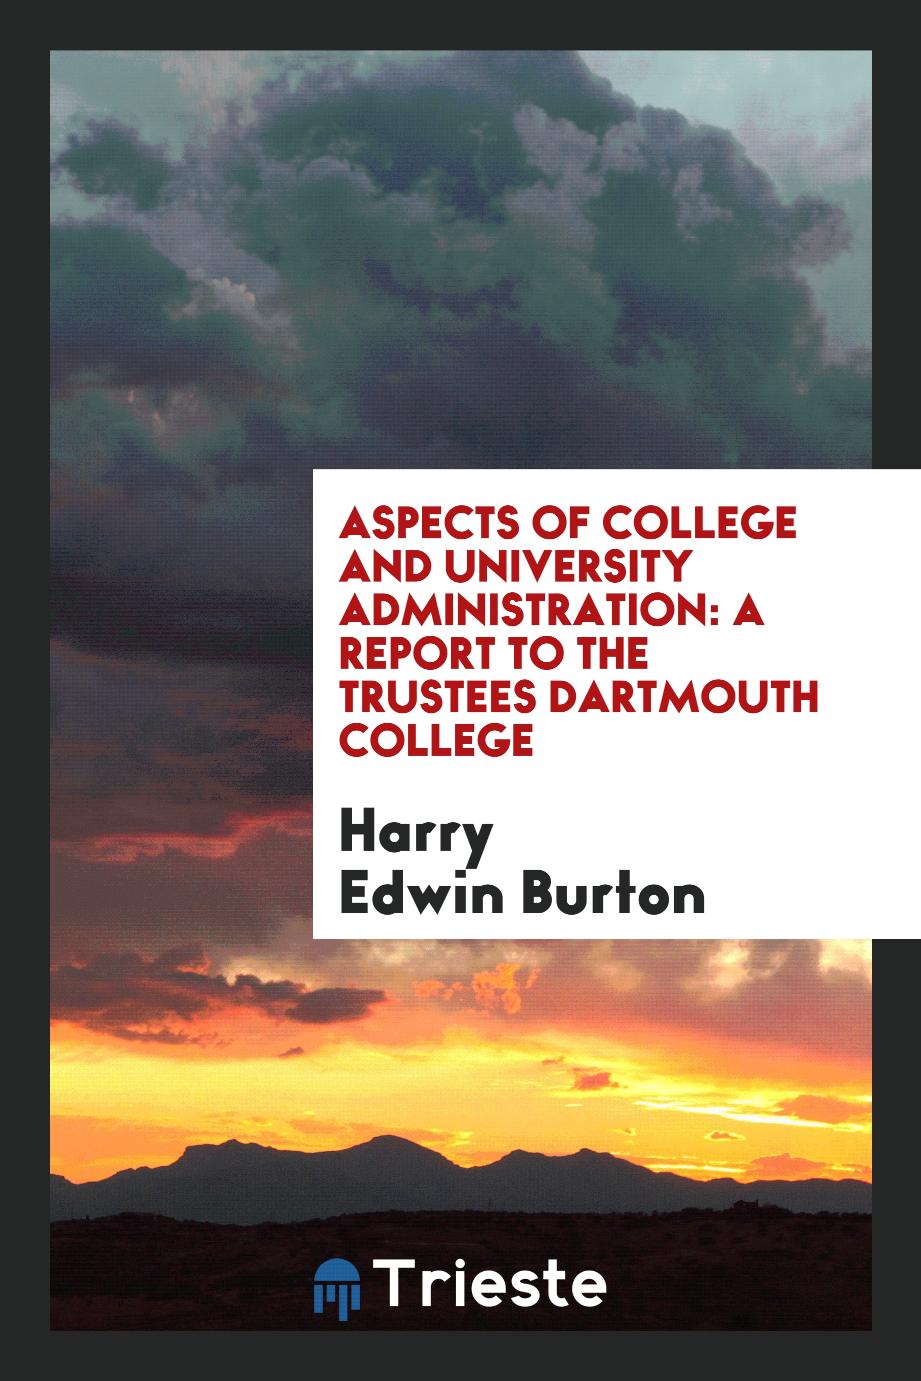 Aspects of College and University Administration: A Report to the Trustees Dartmouth College